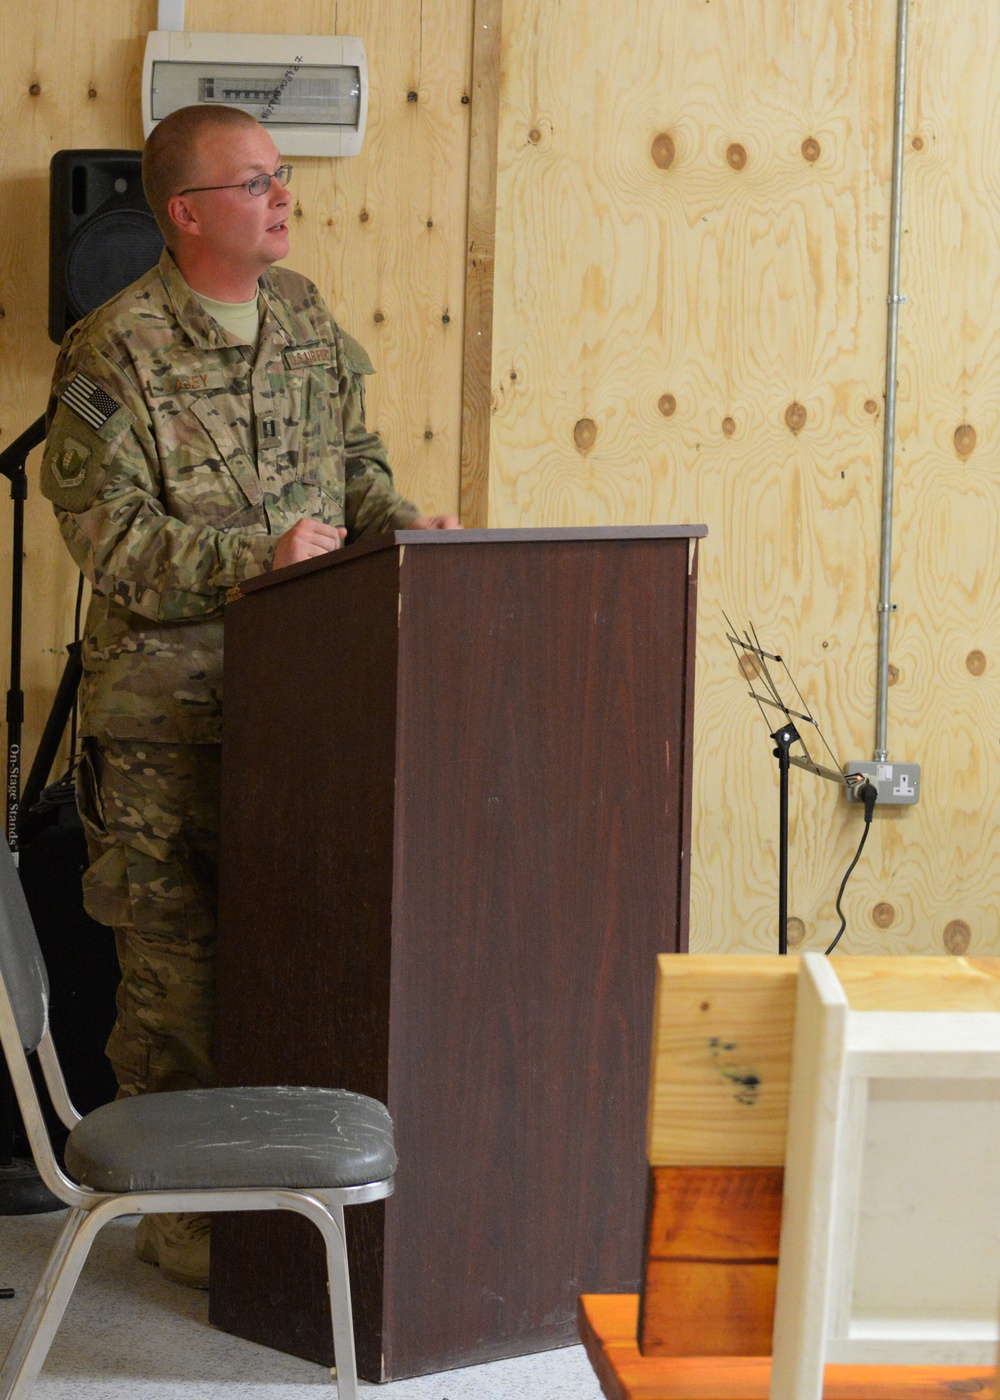 Bagram chaplains provide spiritual support to Airmen throughout AOR